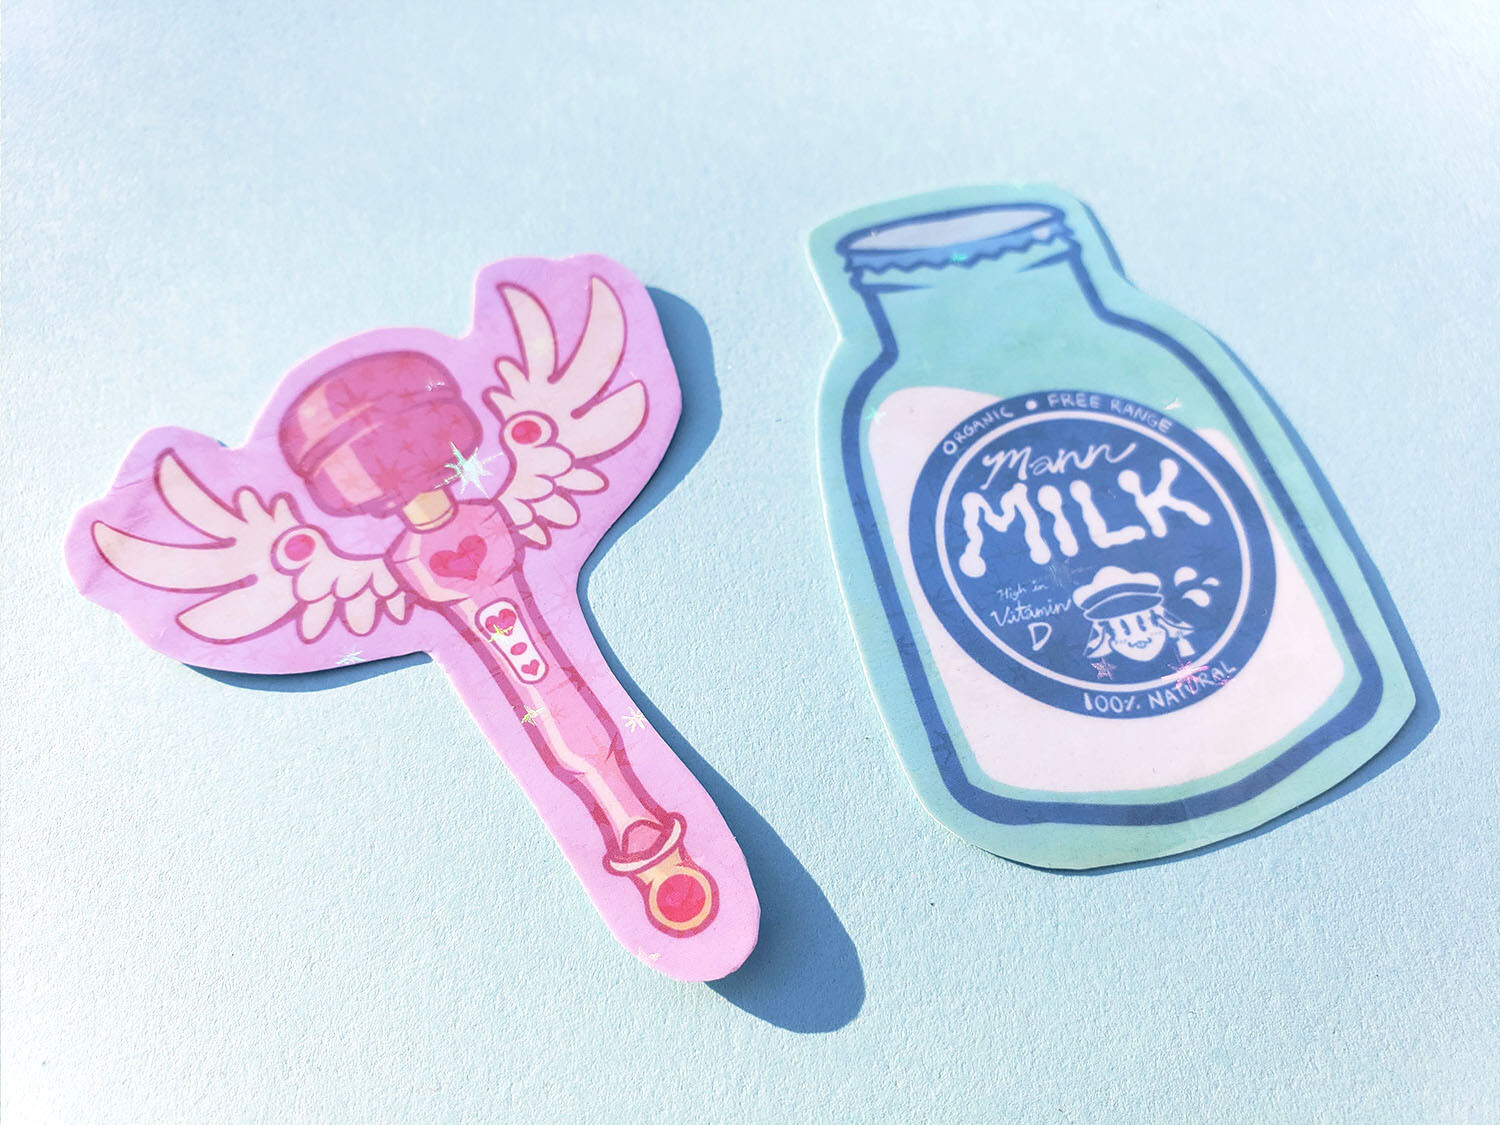 Magical Girl Wand and Mann Milk Stickers!